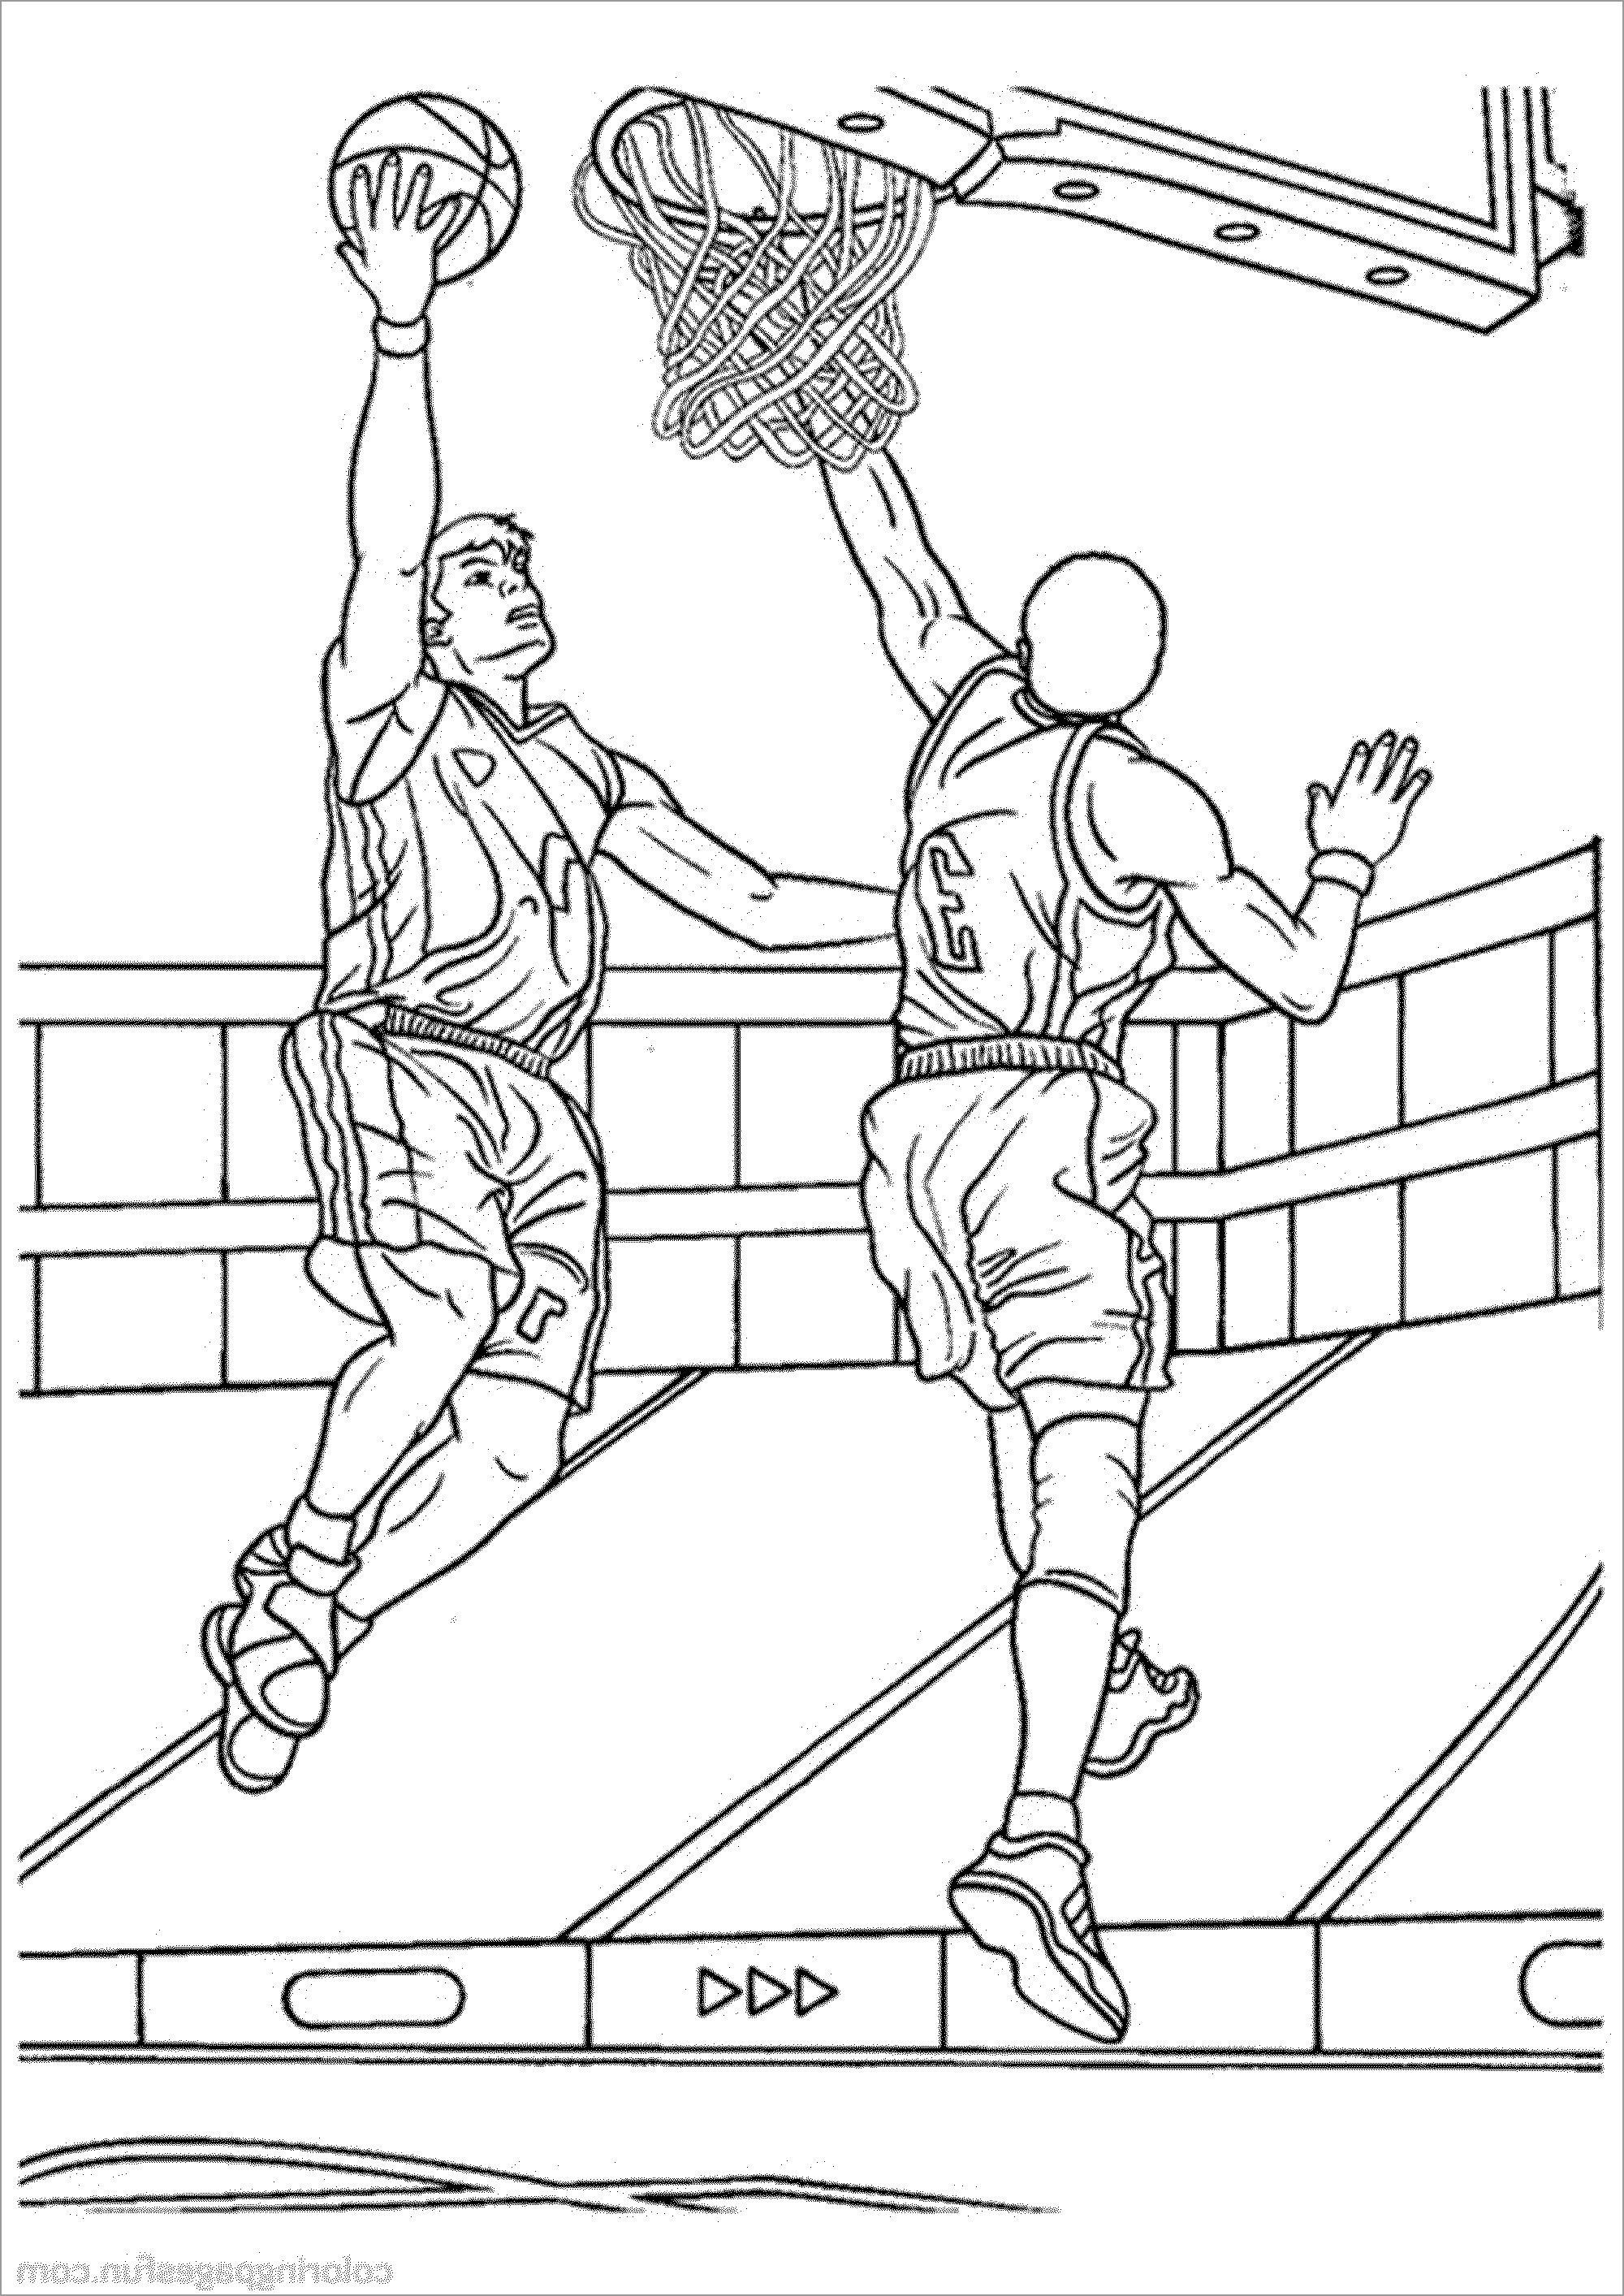 Basketball Coloring Pages to Print